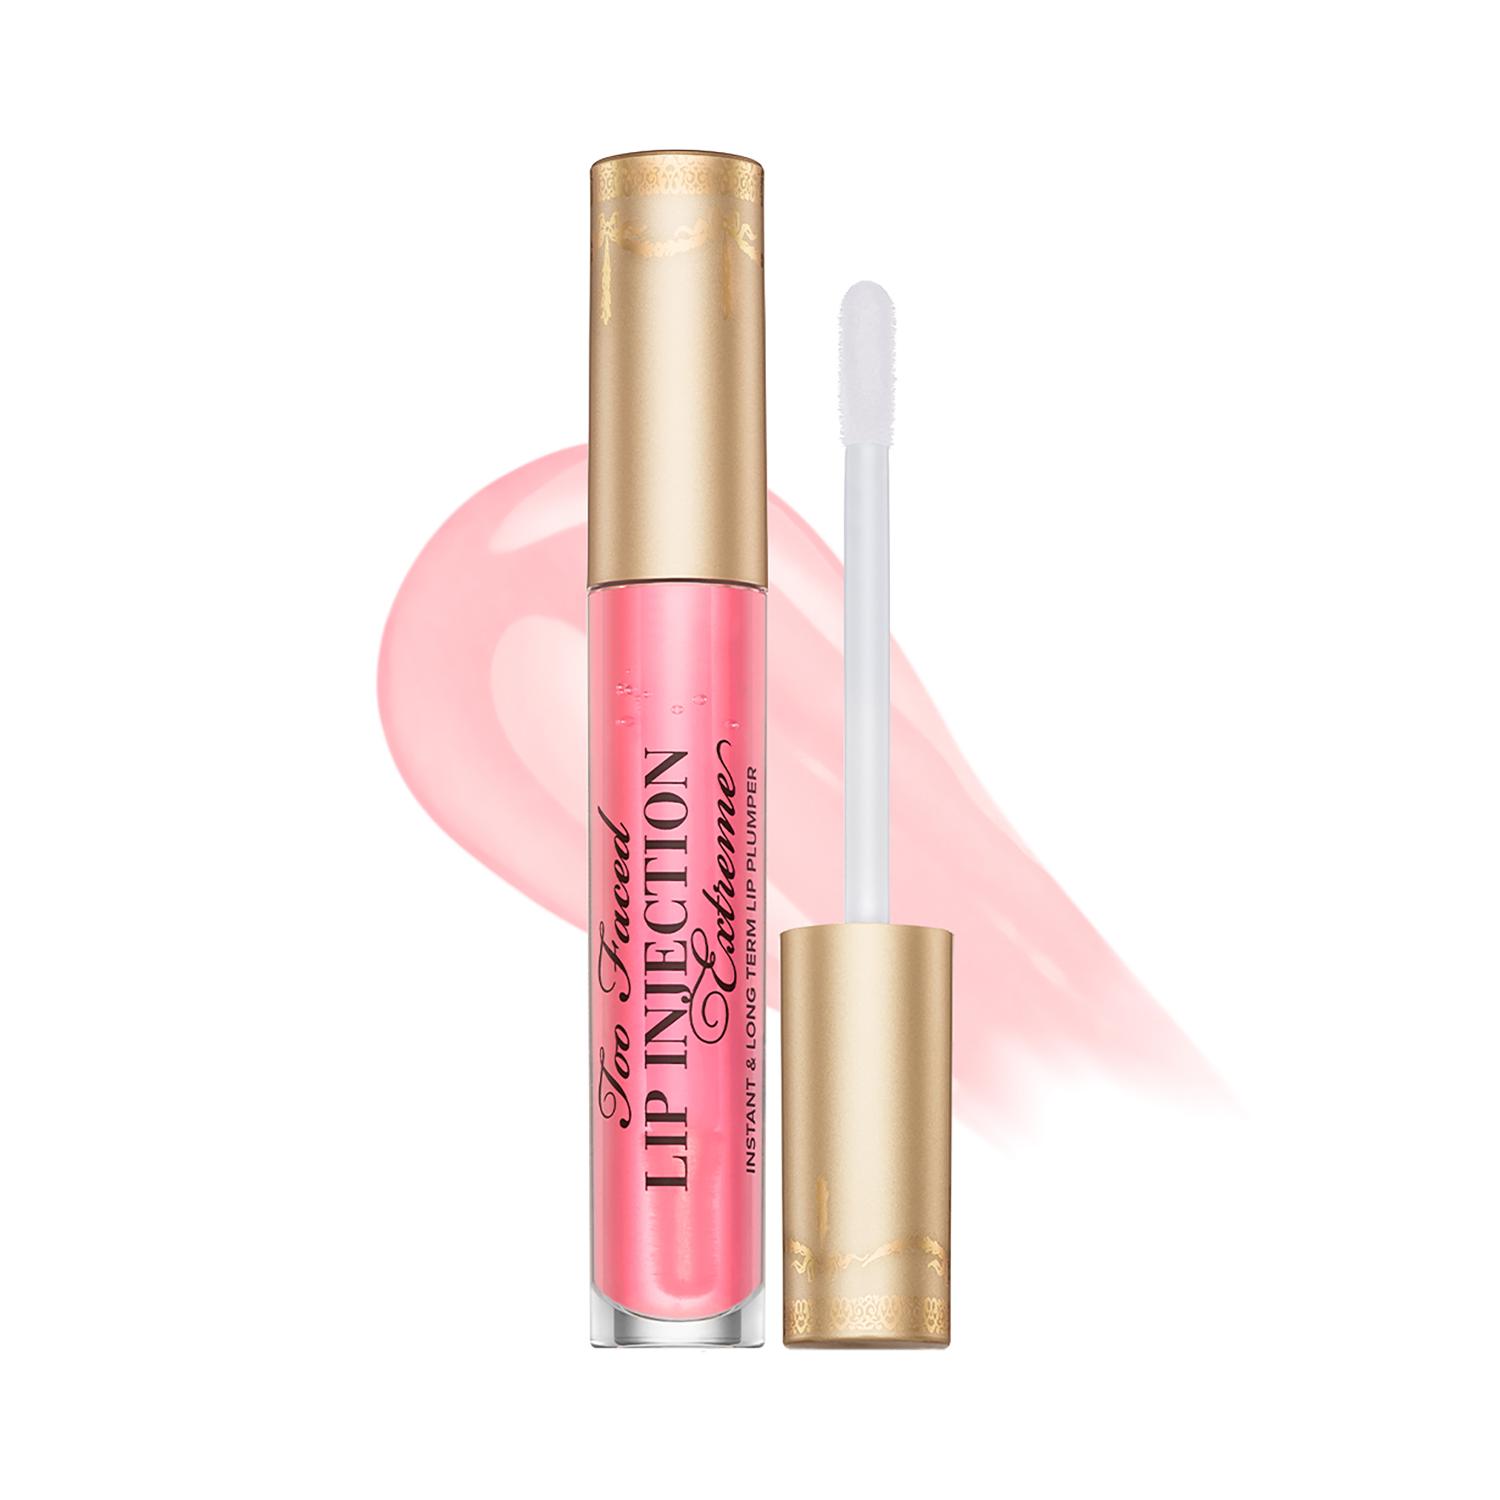 Too Faced | Too Faced Lip Injection Plumping Lip Gloss -  Bubblegum Yum (4g)